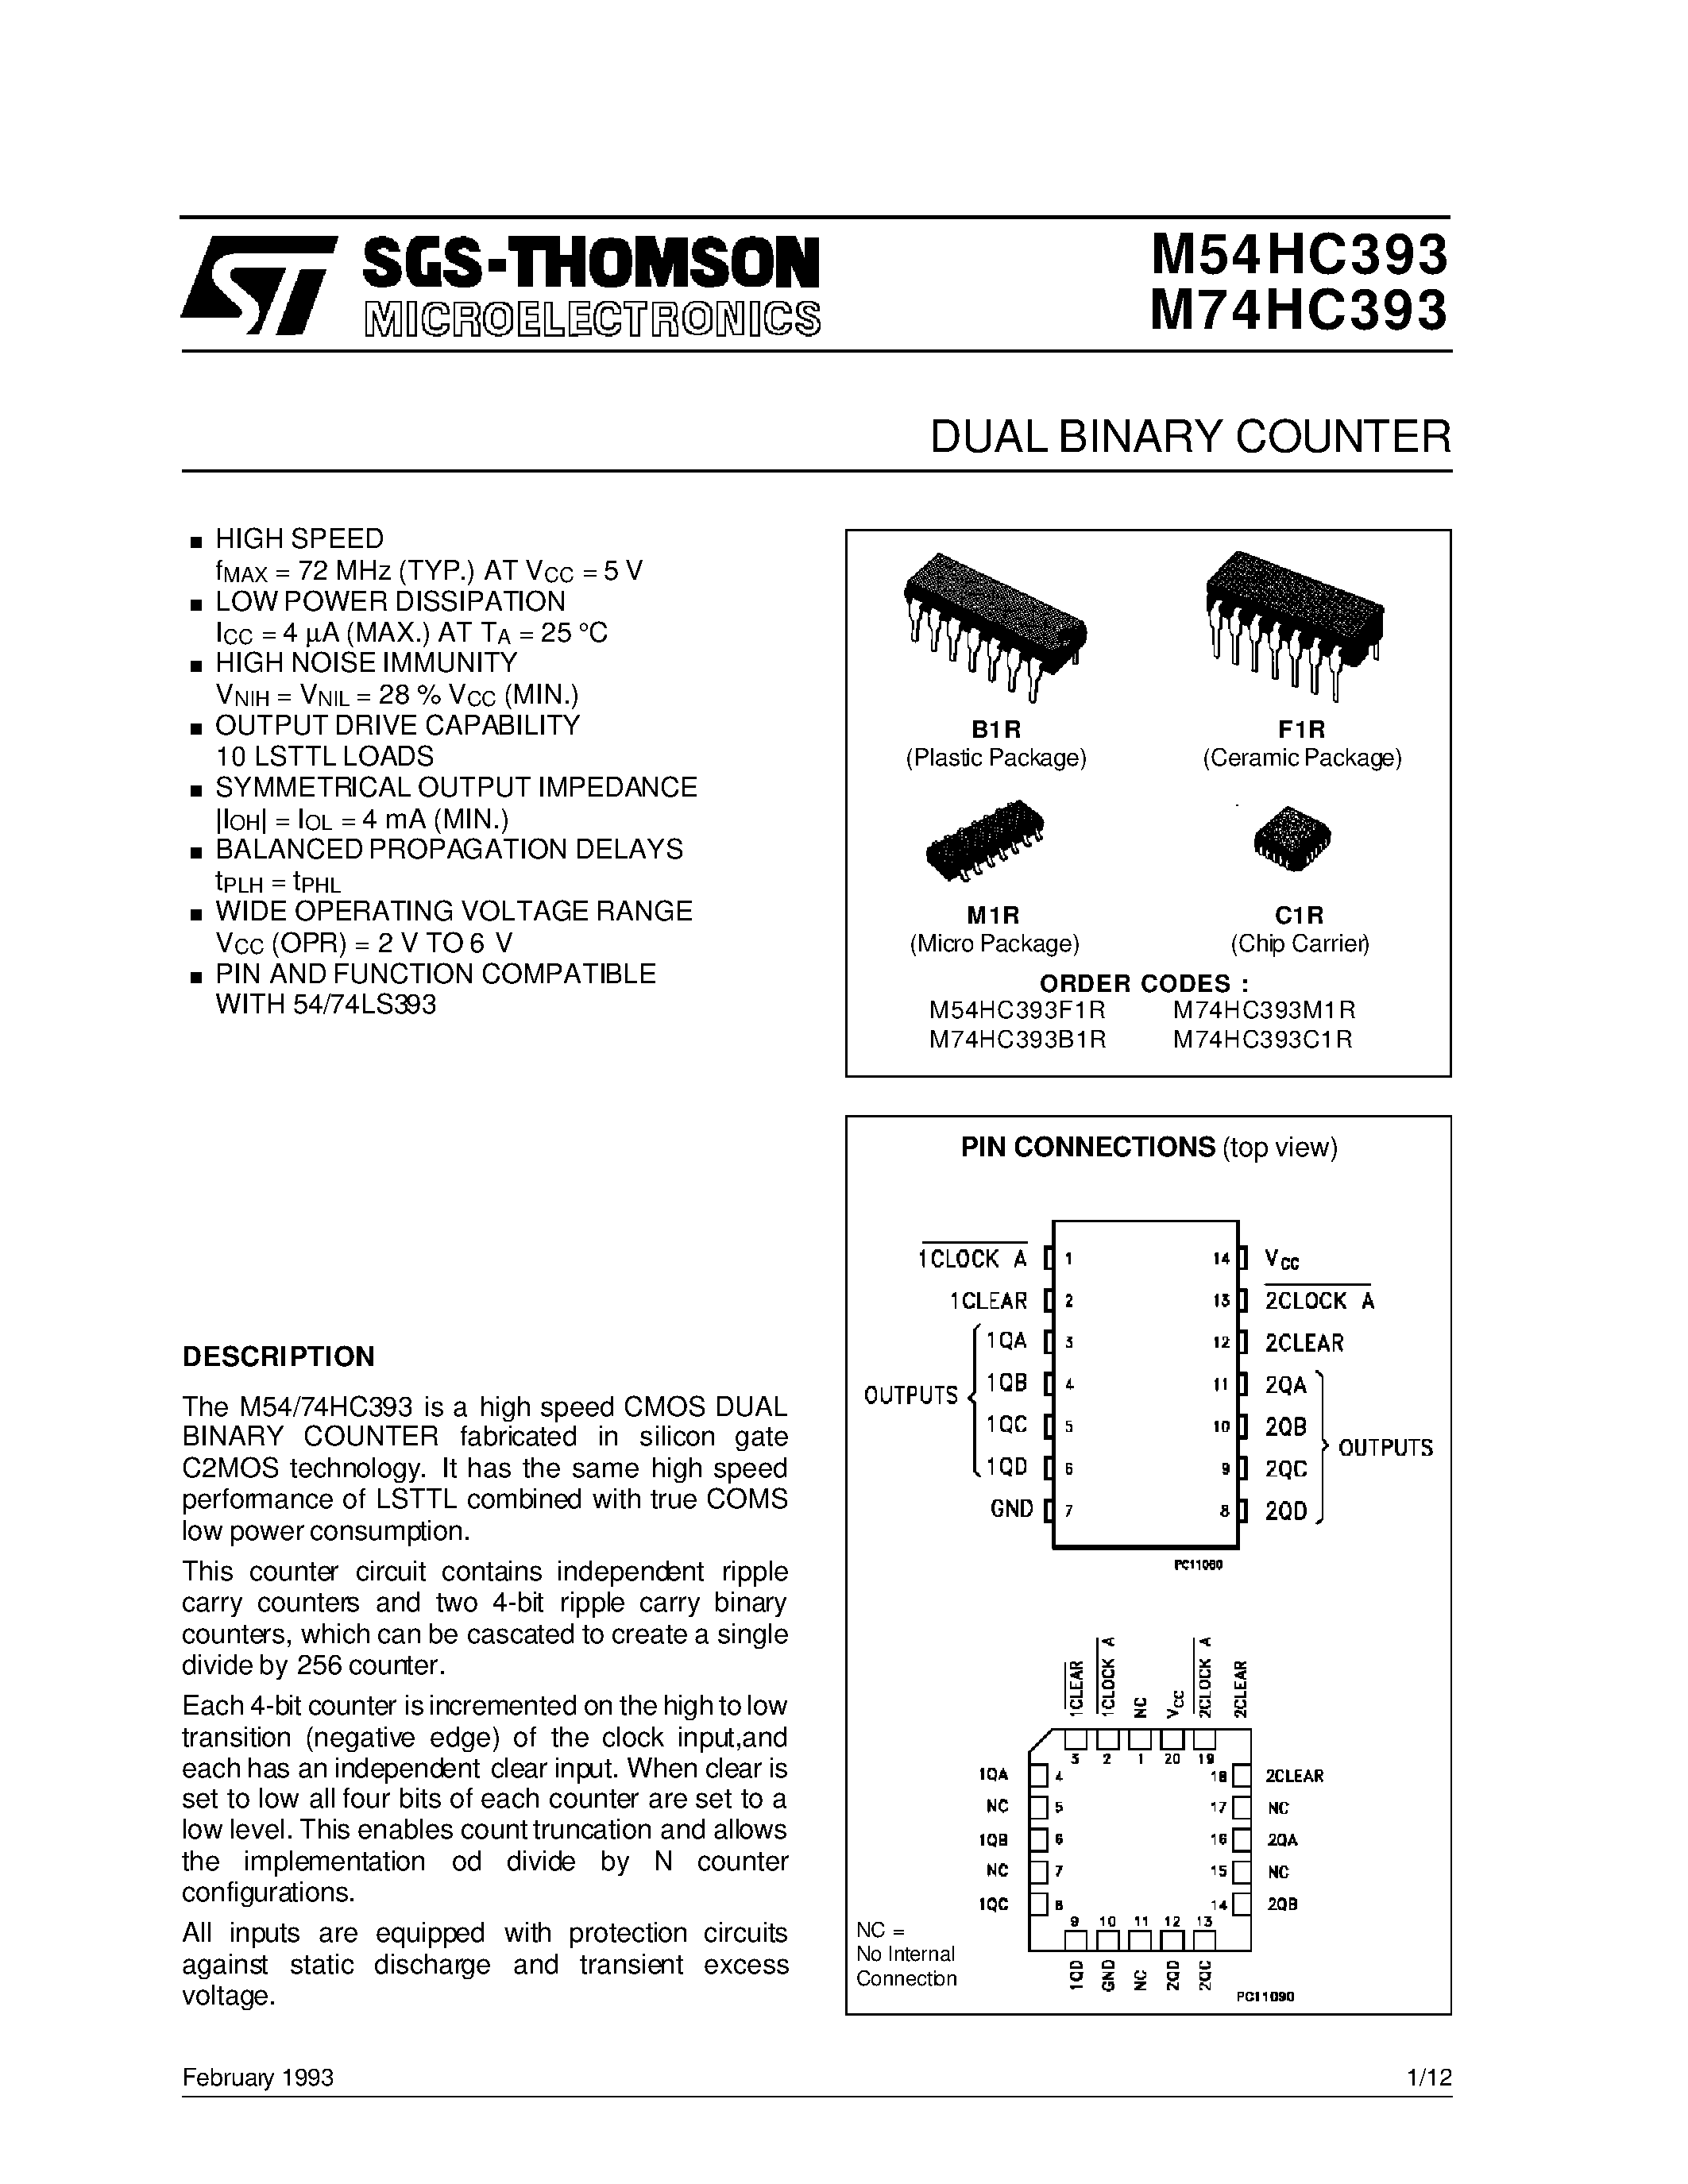 Datasheet M54HC393 - M54HC390F1R M74HC390M1R M74HC390B1R M74HC390C1R page 1